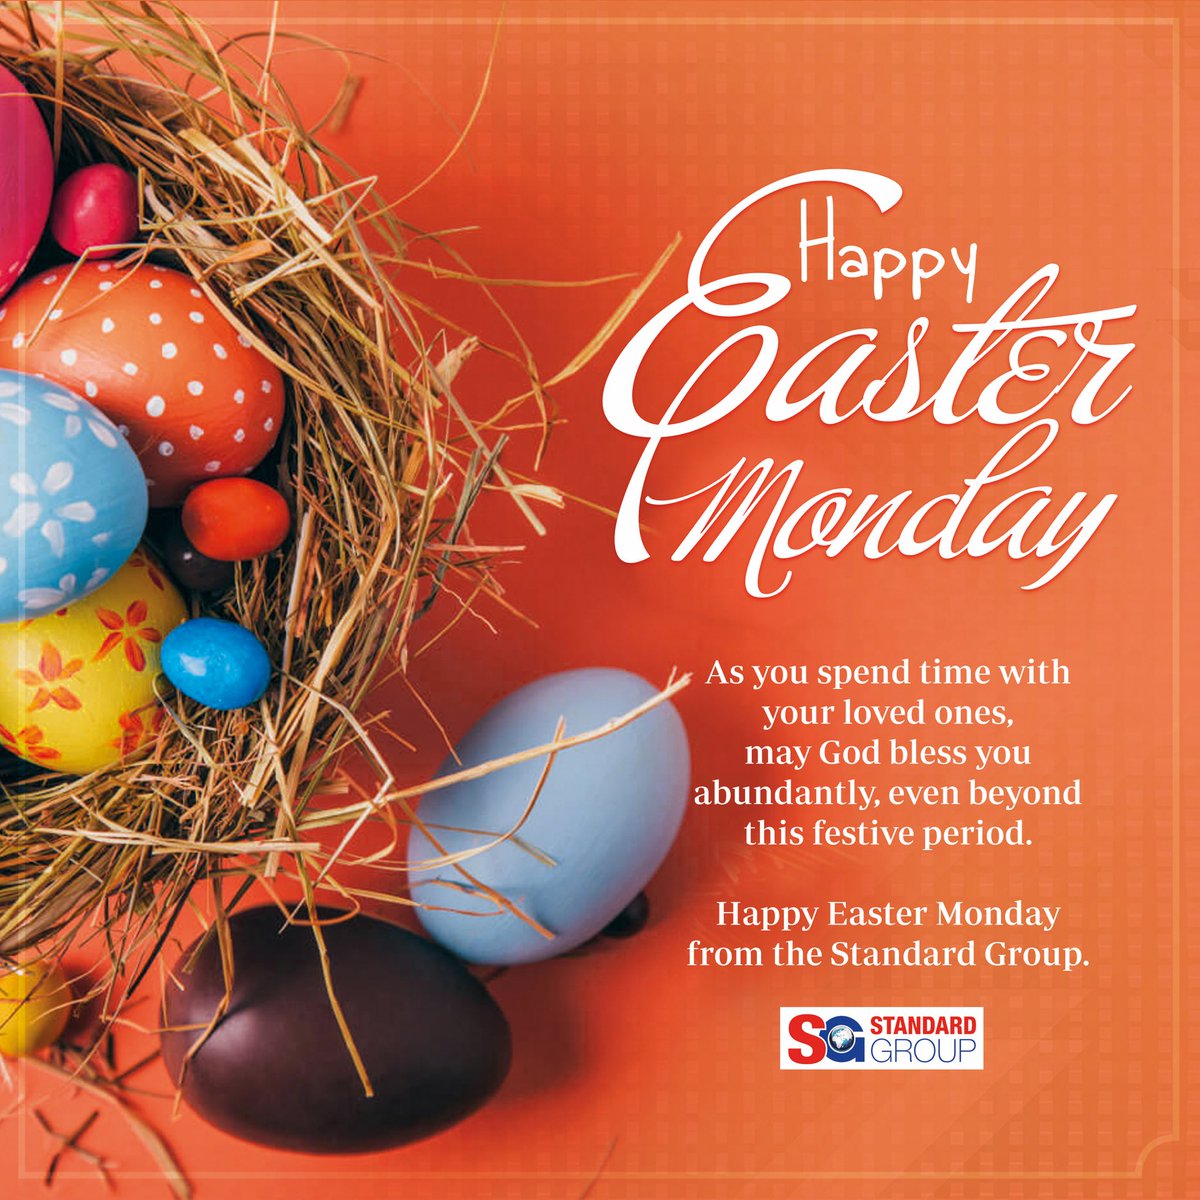 Happy Easter Monday from Standard Group PLC! As you cherish moments with loved ones, may blessings overflow abundantly, extending far beyond this festive season. #HappyEasterMonday